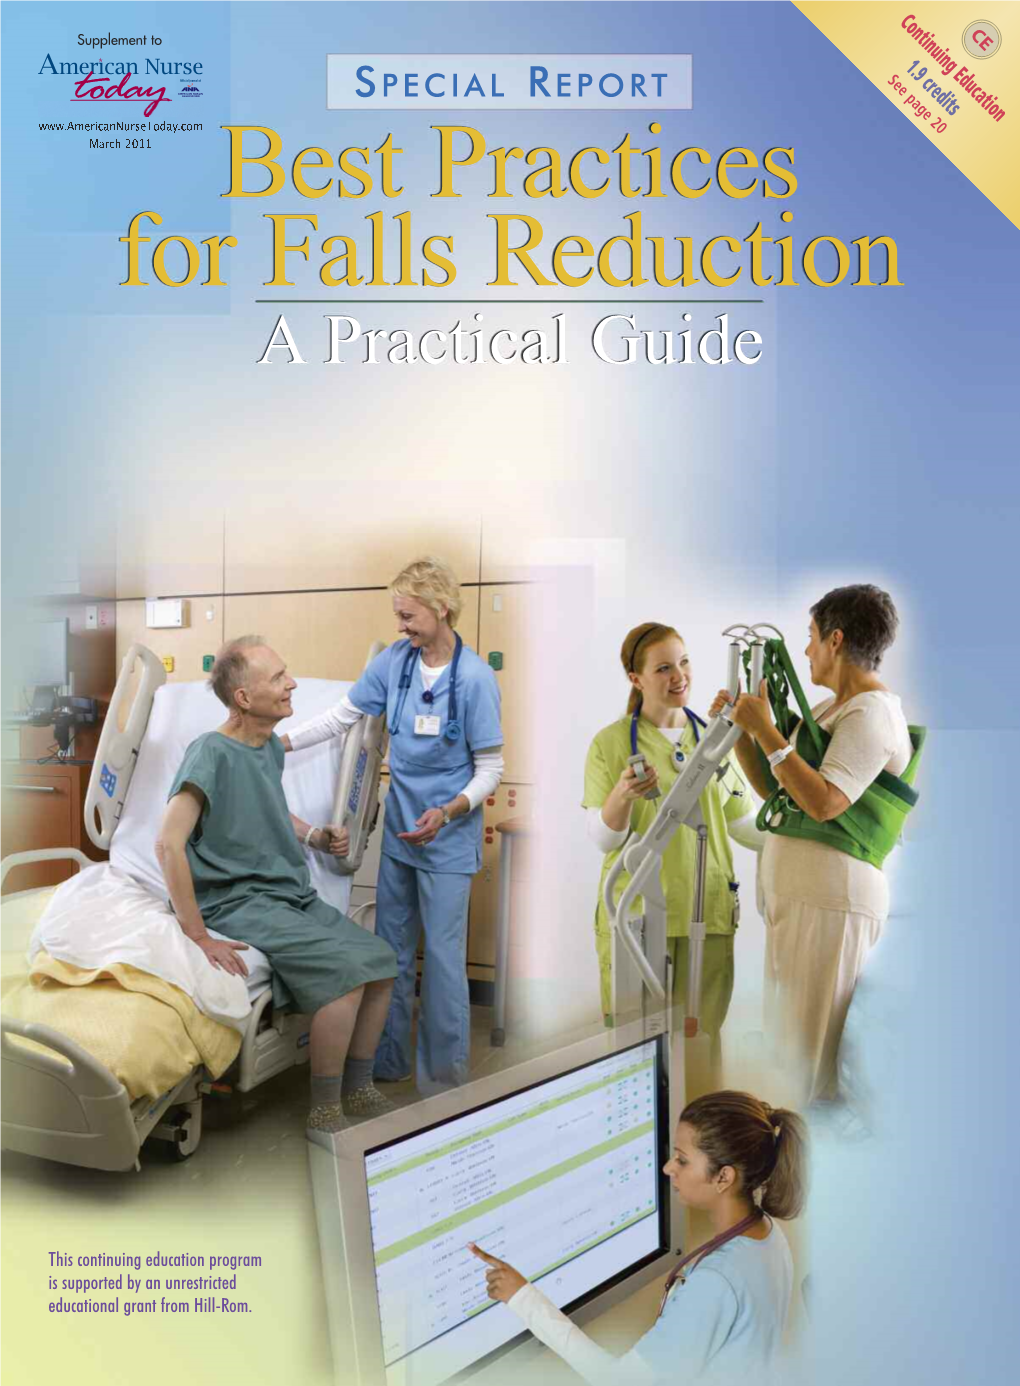 Best Practices for Falls Reduction a Practical Guide